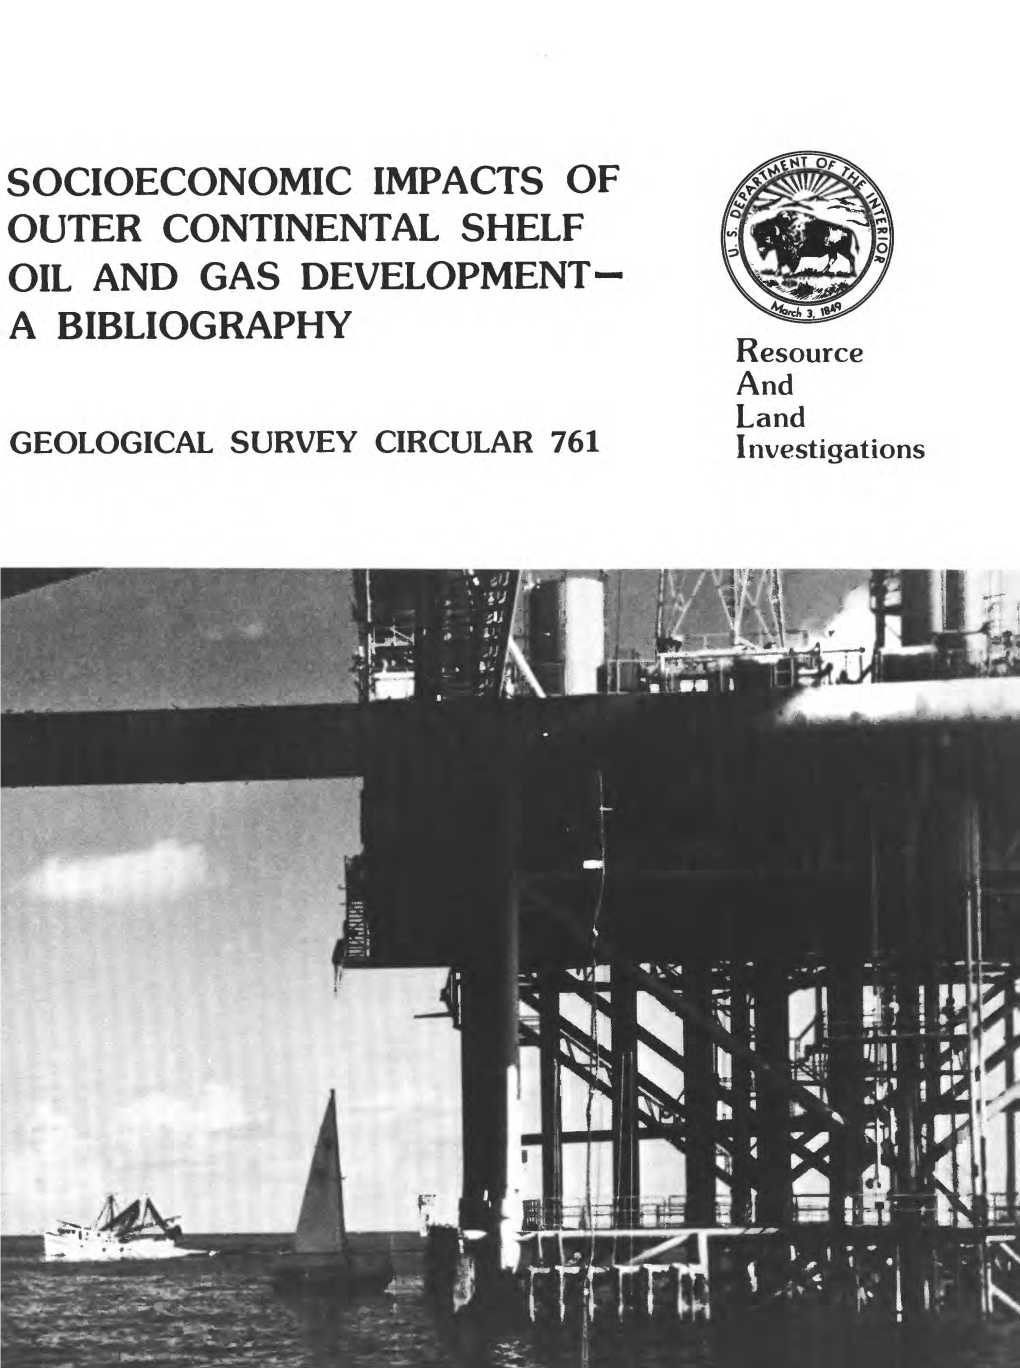 Socioeconomic Impacts of Outer Continental Shelf Oil